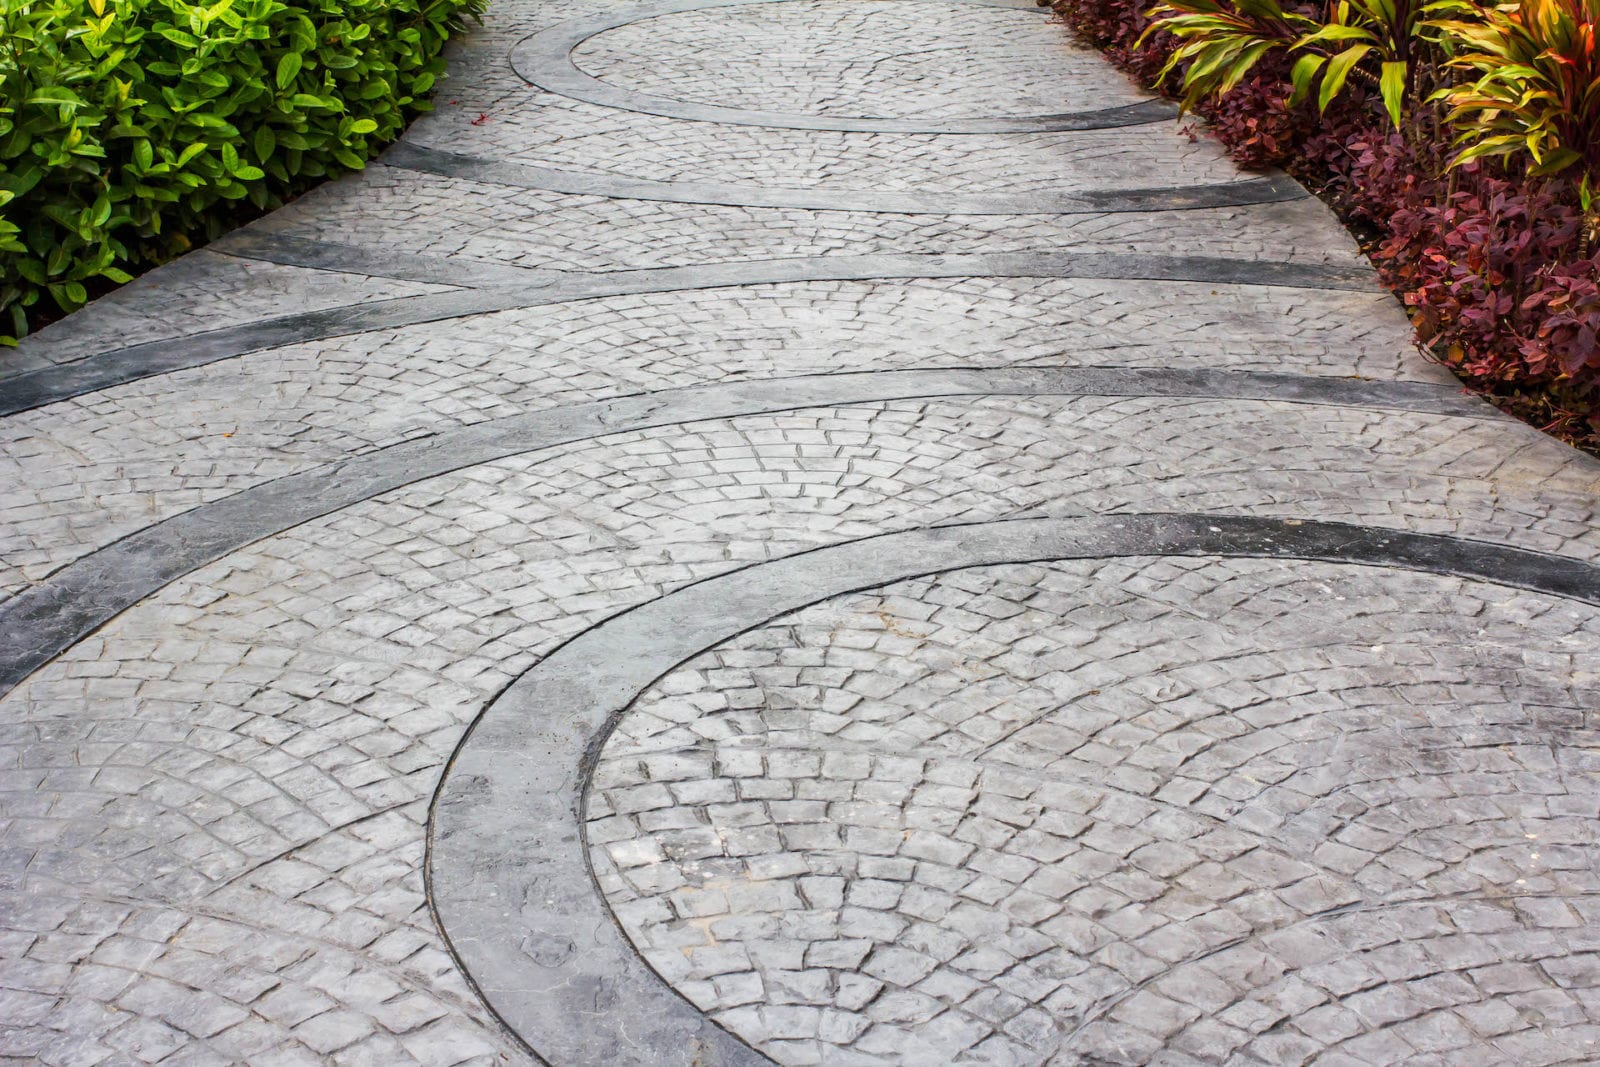 driveway paving stones use types of mortar